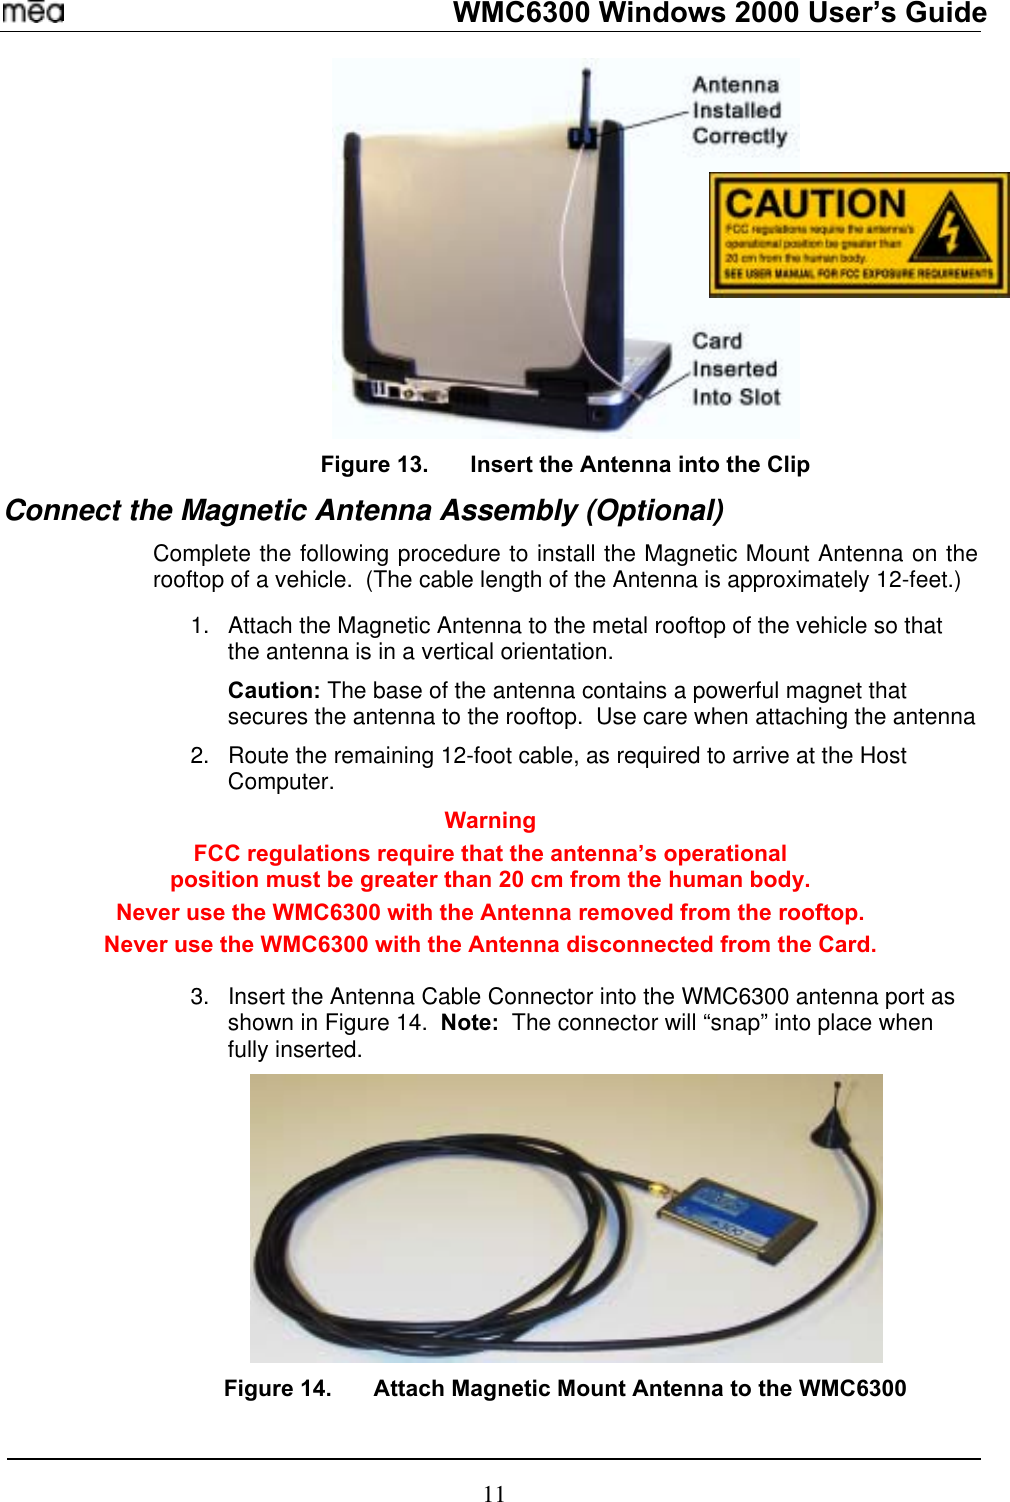   WMC6300 Windows 2000 User’s Guide  Figure 13.  Insert the Antenna into the Clip Connect the Magnetic Antenna Assembly (Optional) Complete the following procedure to install the Magnetic Mount Antenna on the rooftop of a vehicle.  (The cable length of the Antenna is approximately 12-feet.)  1. 2. 3. Attach the Magnetic Antenna to the metal rooftop of the vehicle so that the antenna is in a vertical orientation.   Caution: The base of the antenna contains a powerful magnet that secures the antenna to the rooftop.  Use care when attaching the antenna Route the remaining 12-foot cable, as required to arrive at the Host Computer. Warning FCC regulations require that the antenna’s operational  position must be greater than 20 cm from the human body.   Never use the WMC6300 with the Antenna removed from the rooftop. Never use the WMC6300 with the Antenna disconnected from the Card.  Insert the Antenna Cable Connector into the WMC6300 antenna port as shown in Figure 14.  Note:  The connector will “snap” into place when fully inserted.  Figure 14.  Attach Magnetic Mount Antenna to the WMC6300 11 